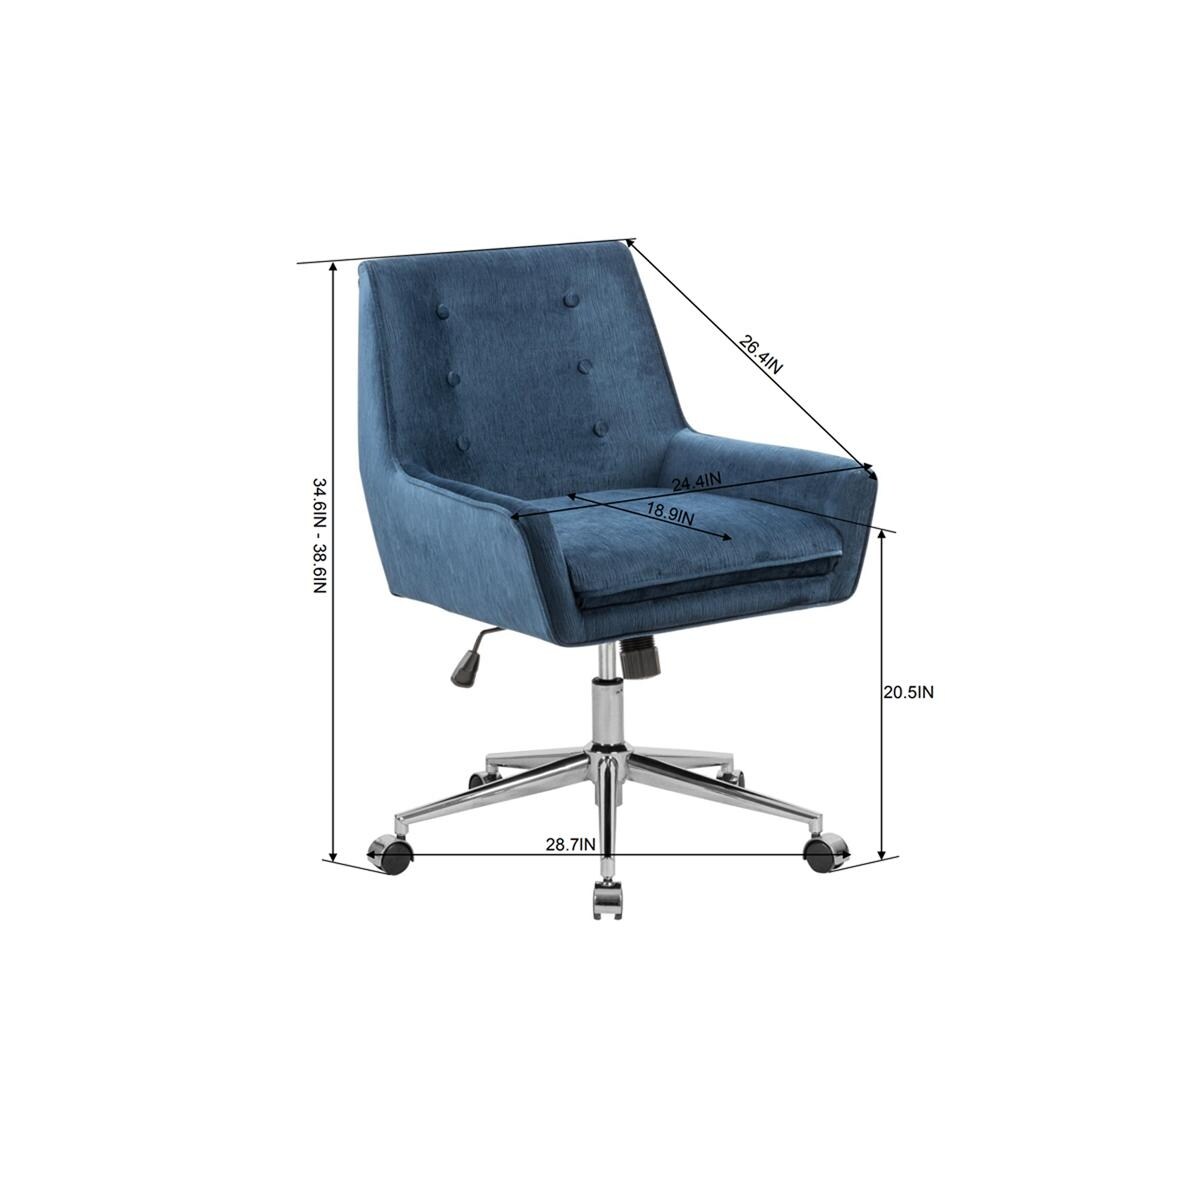 Blue Furniture R Home Office Chair Mid Back Computer Desk Task Chairs Upholstered Support Swivel Adjustable Height with Armrests